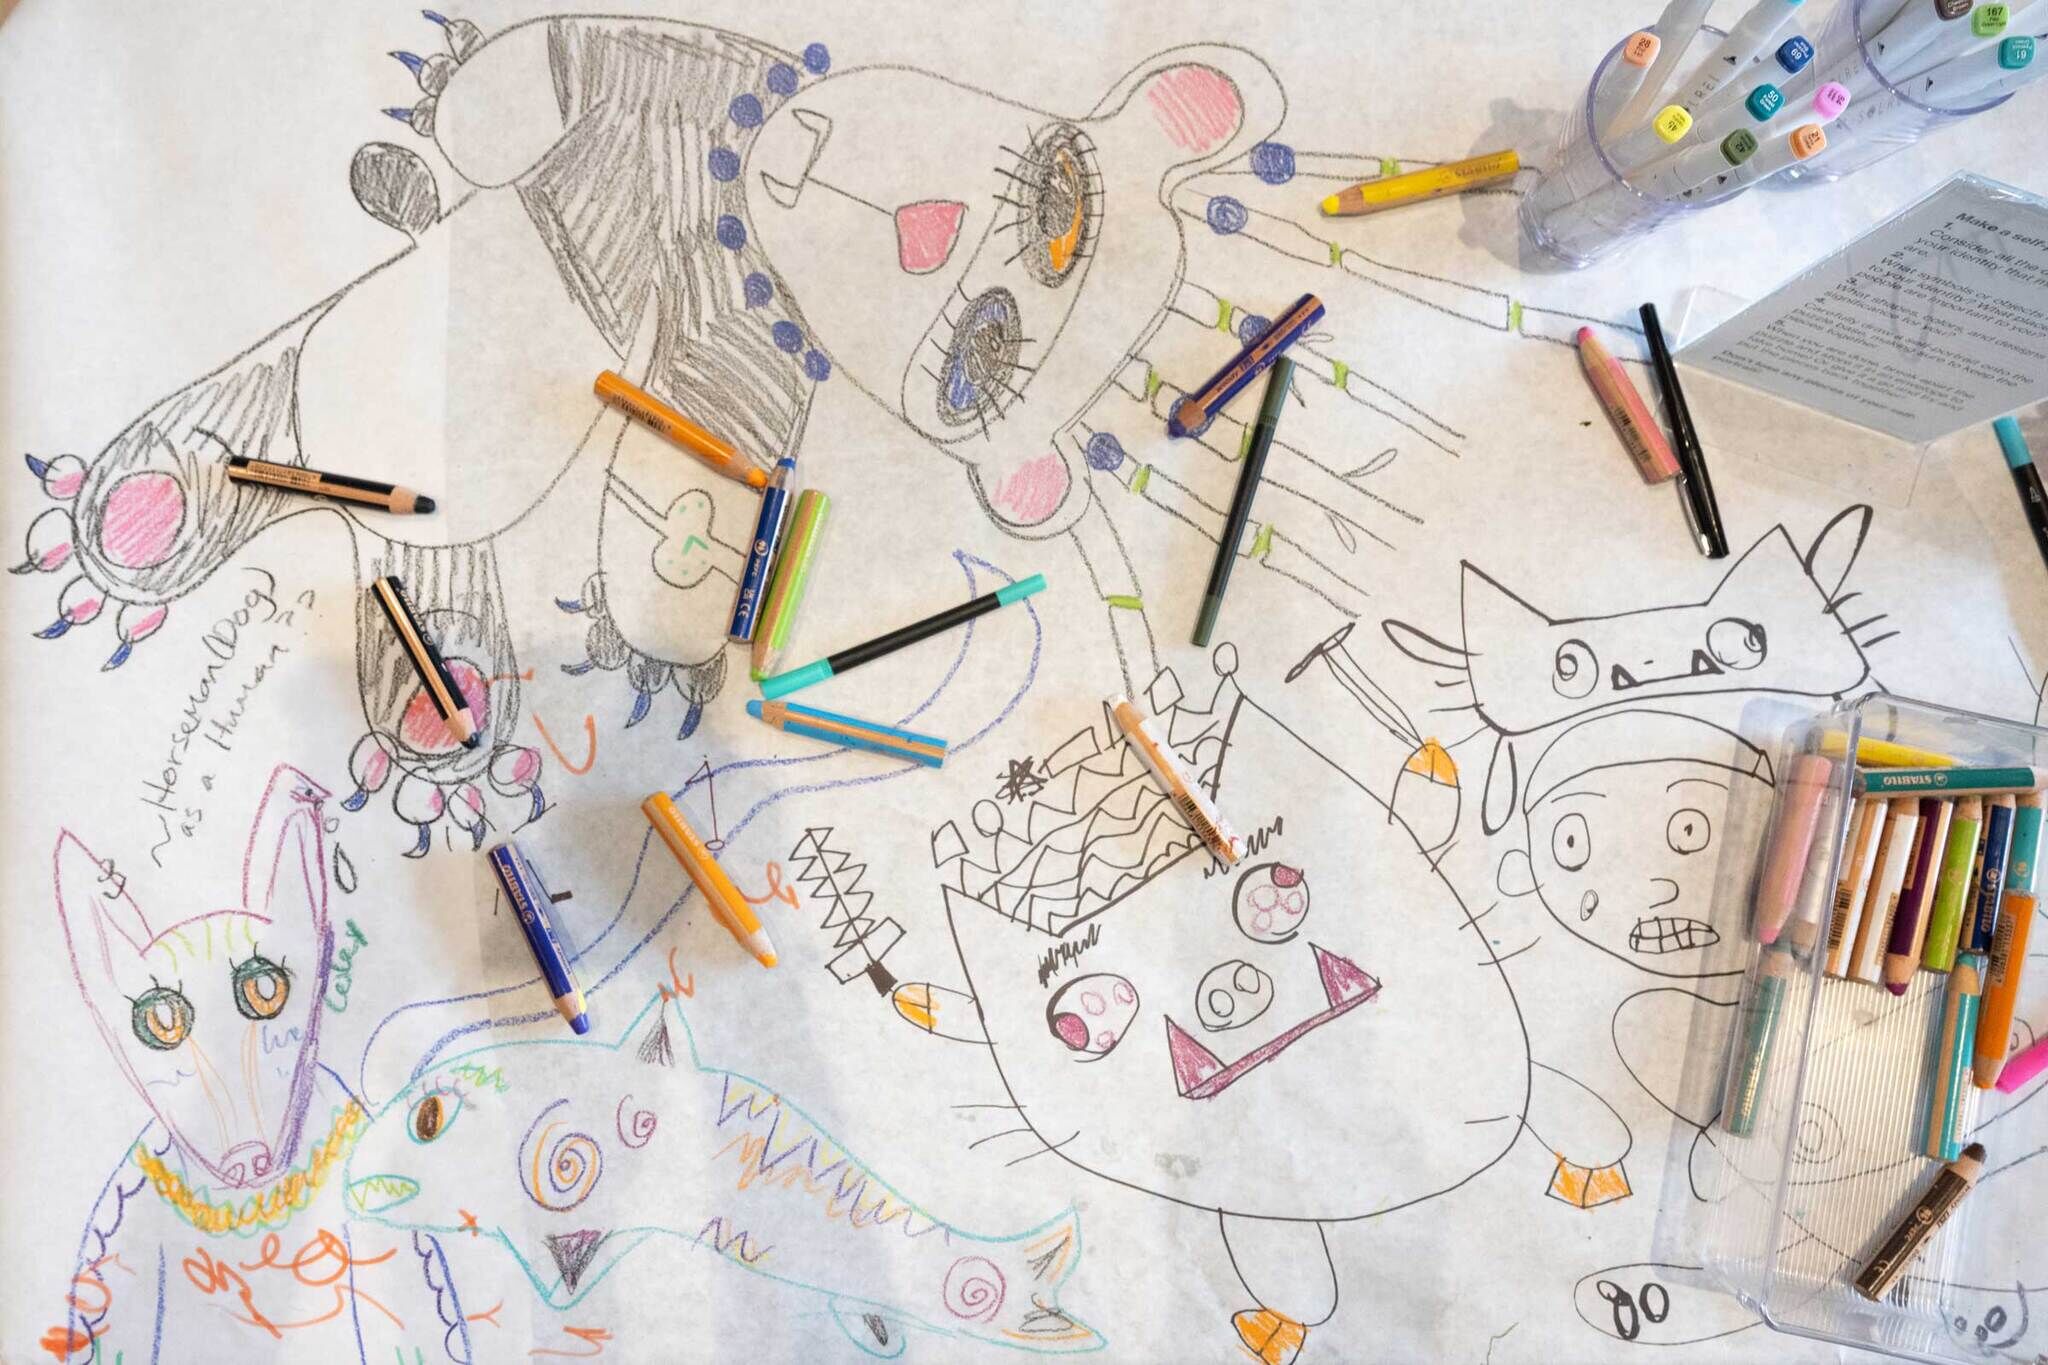 White butcher paper filled with doodles of colorful animals. Markers are splayed across the surface. 